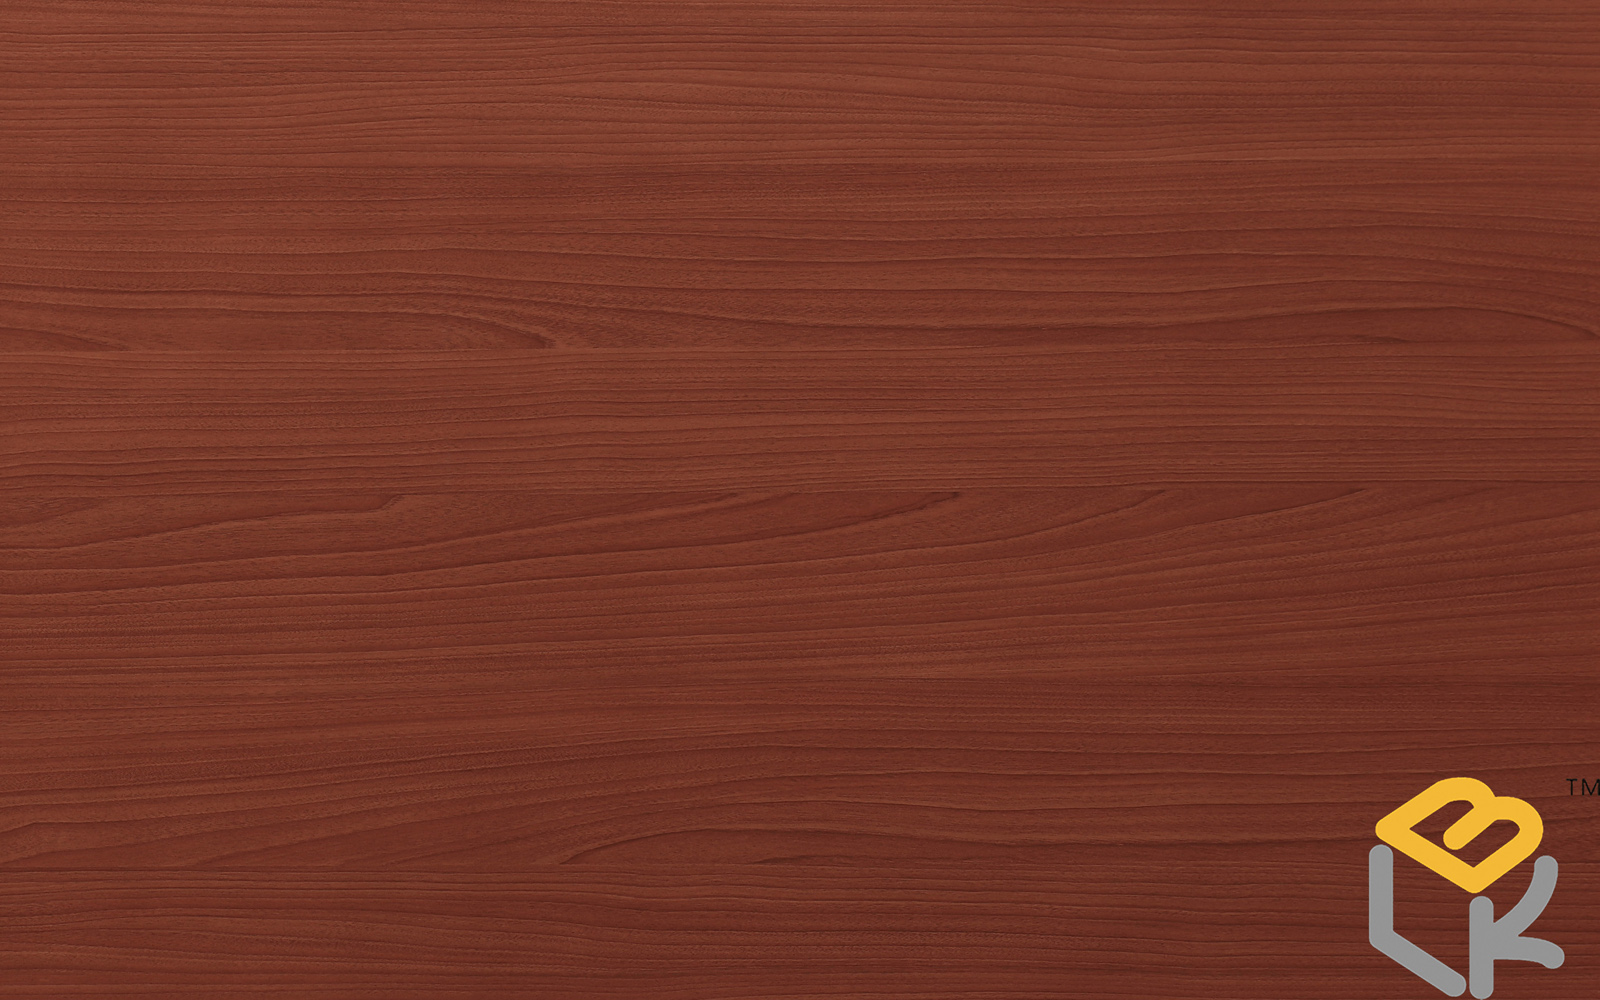 Redwood melamine faced plywood from China